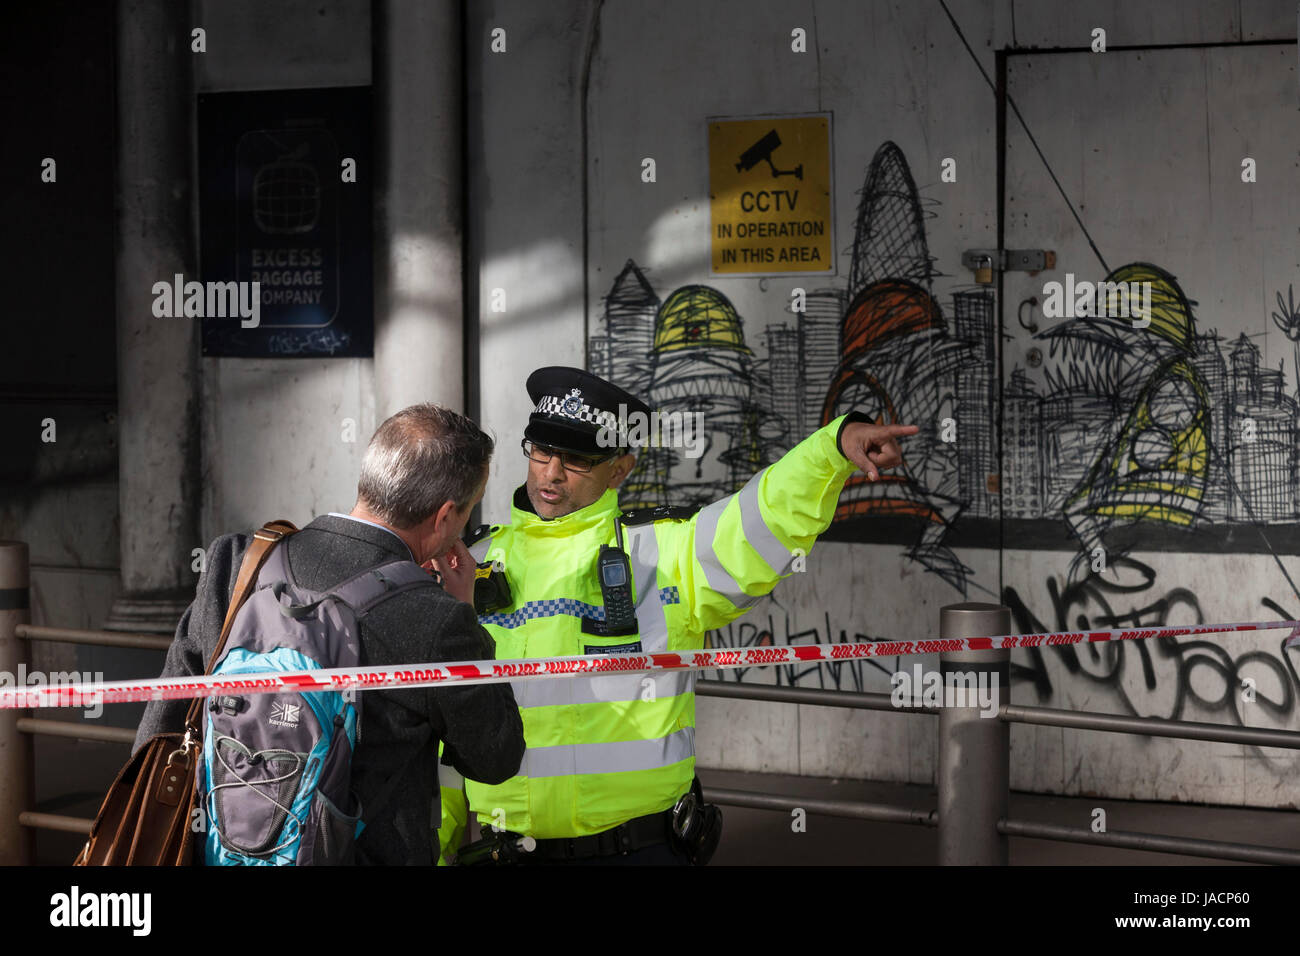 36 hours after the London Bridge and Borough Market terrorist attack, the capital returns to normality and Londoners return to their first day to work so Police officers help with directions as roads are still closed to traffic and pedestrian use, on Monday 5th June 2017, in the south London borough of Southwark, England. Seven people were killed and many others left with life-changing injuries - but the British spirit of defiance and to carry on with every day life, endures. Stock Photo